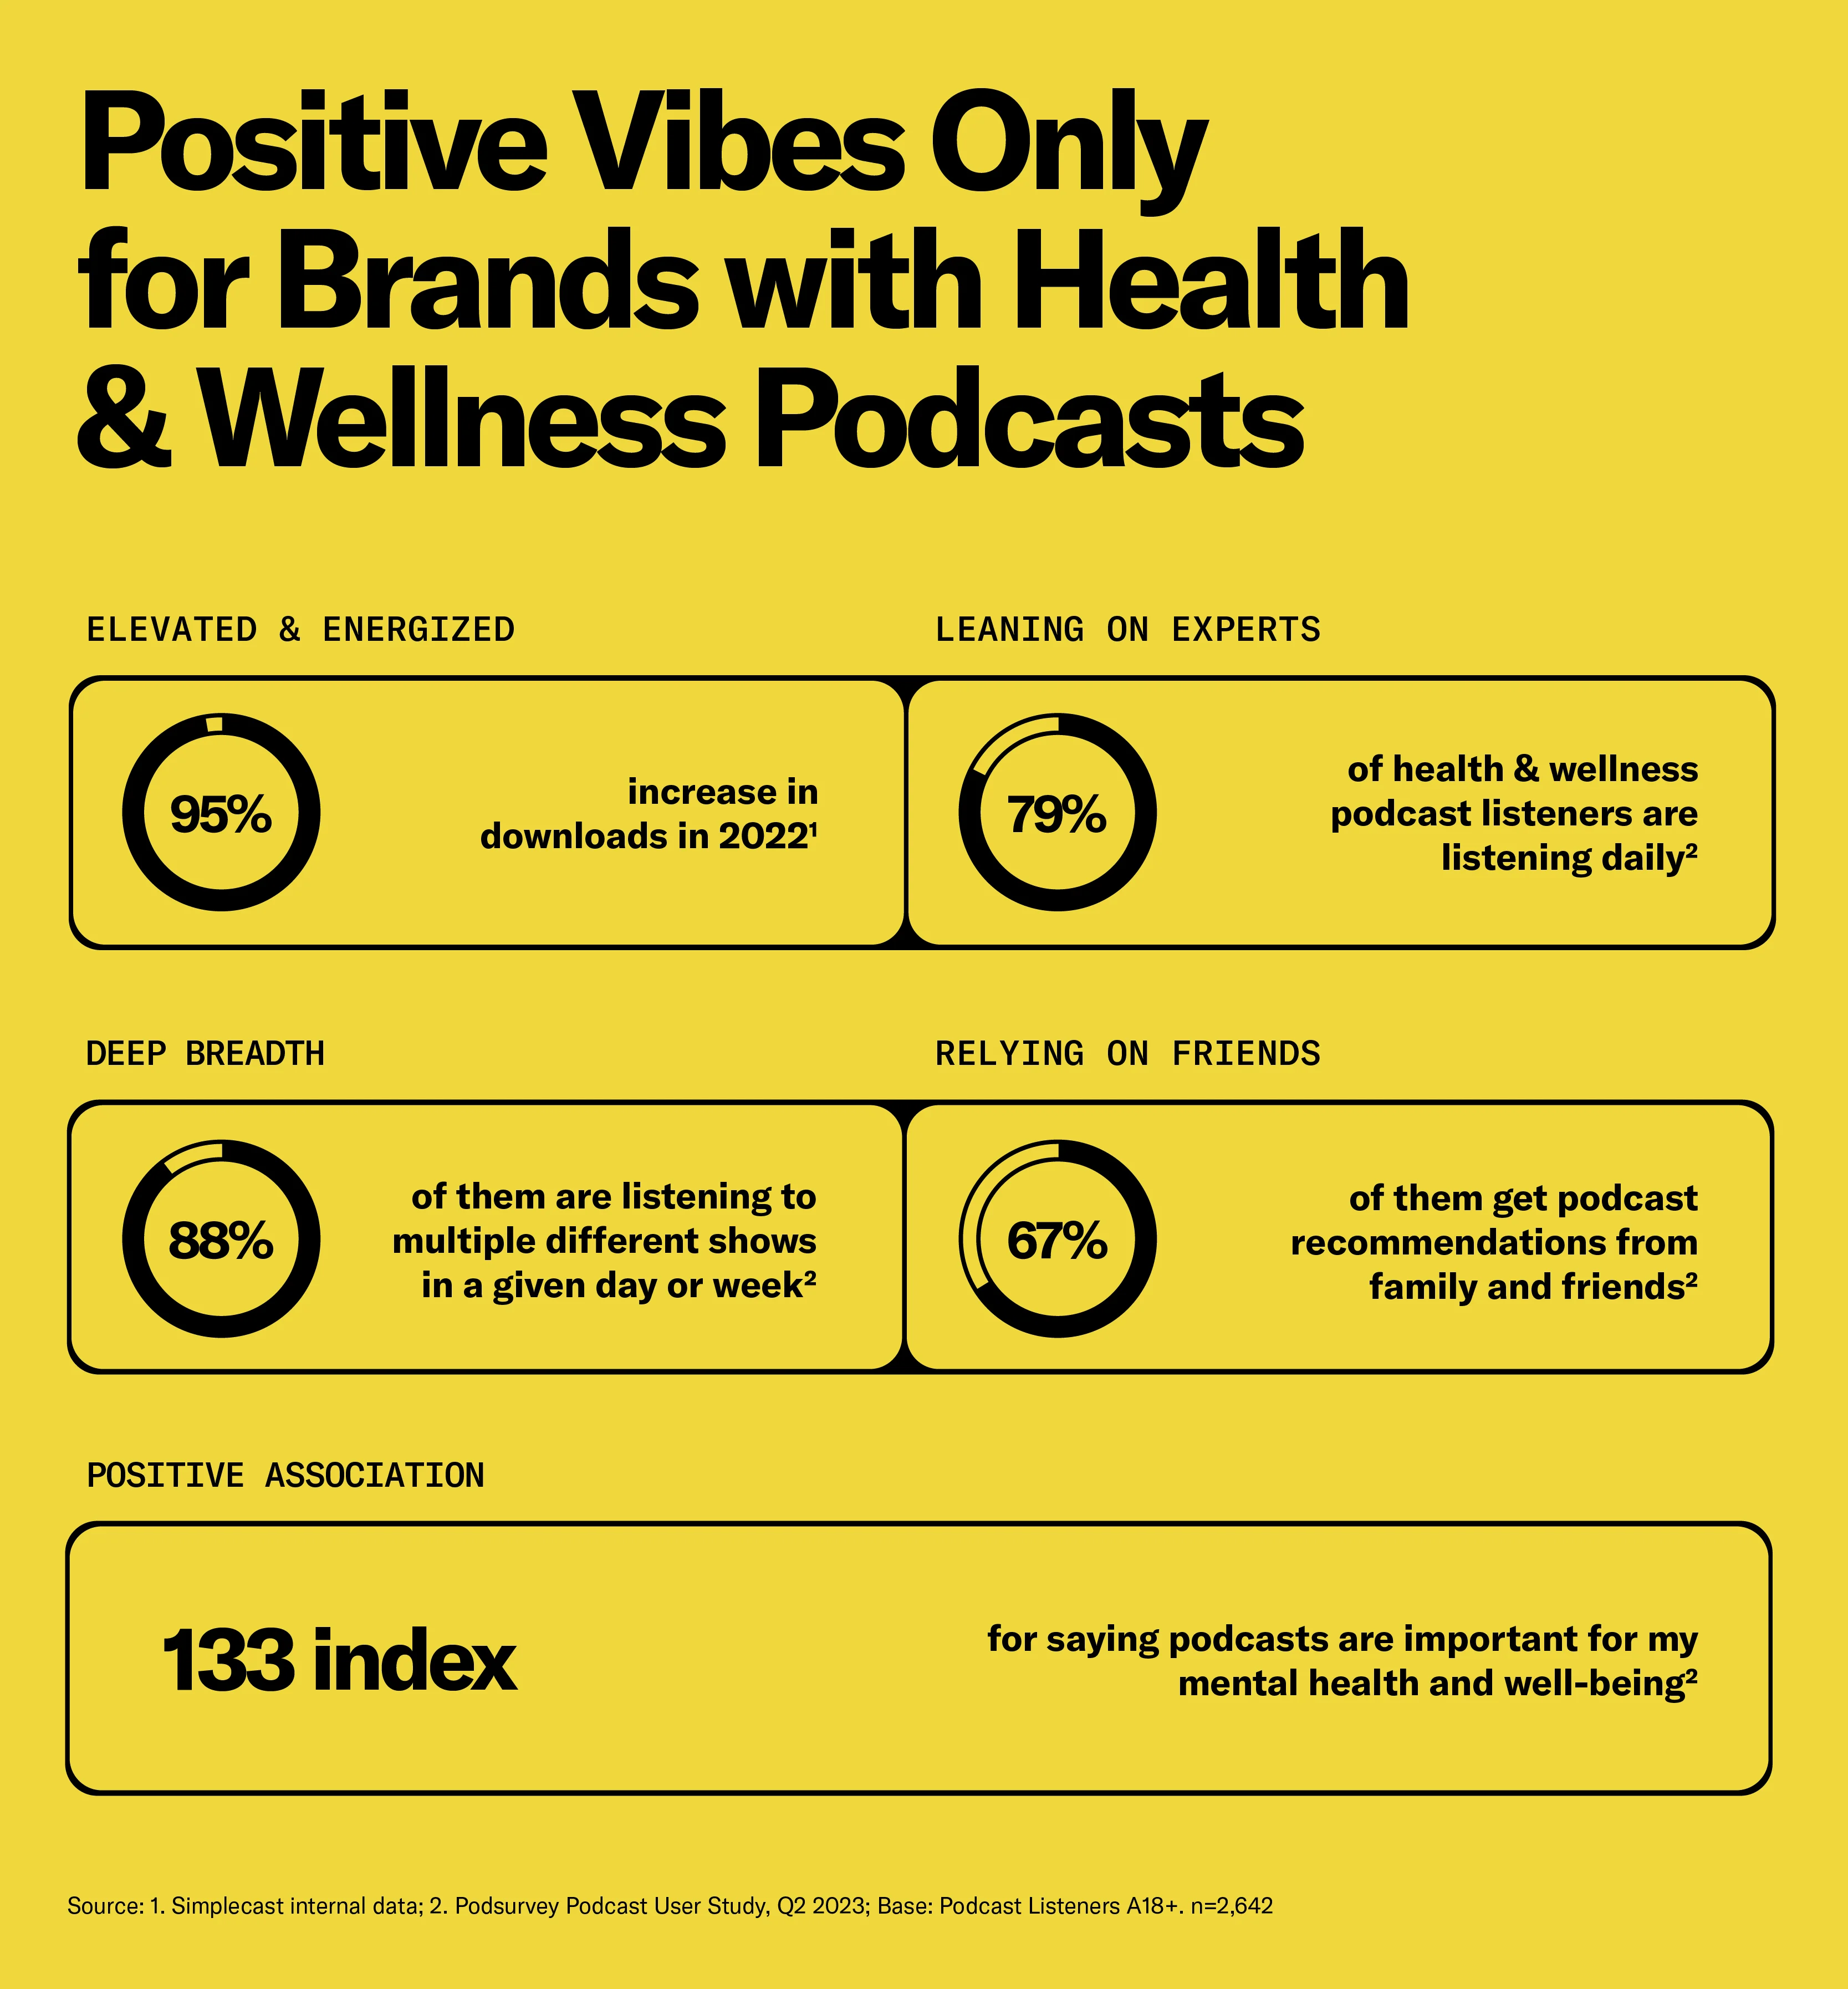 Advertise on Health & Wellness podcasts to reach key audiences